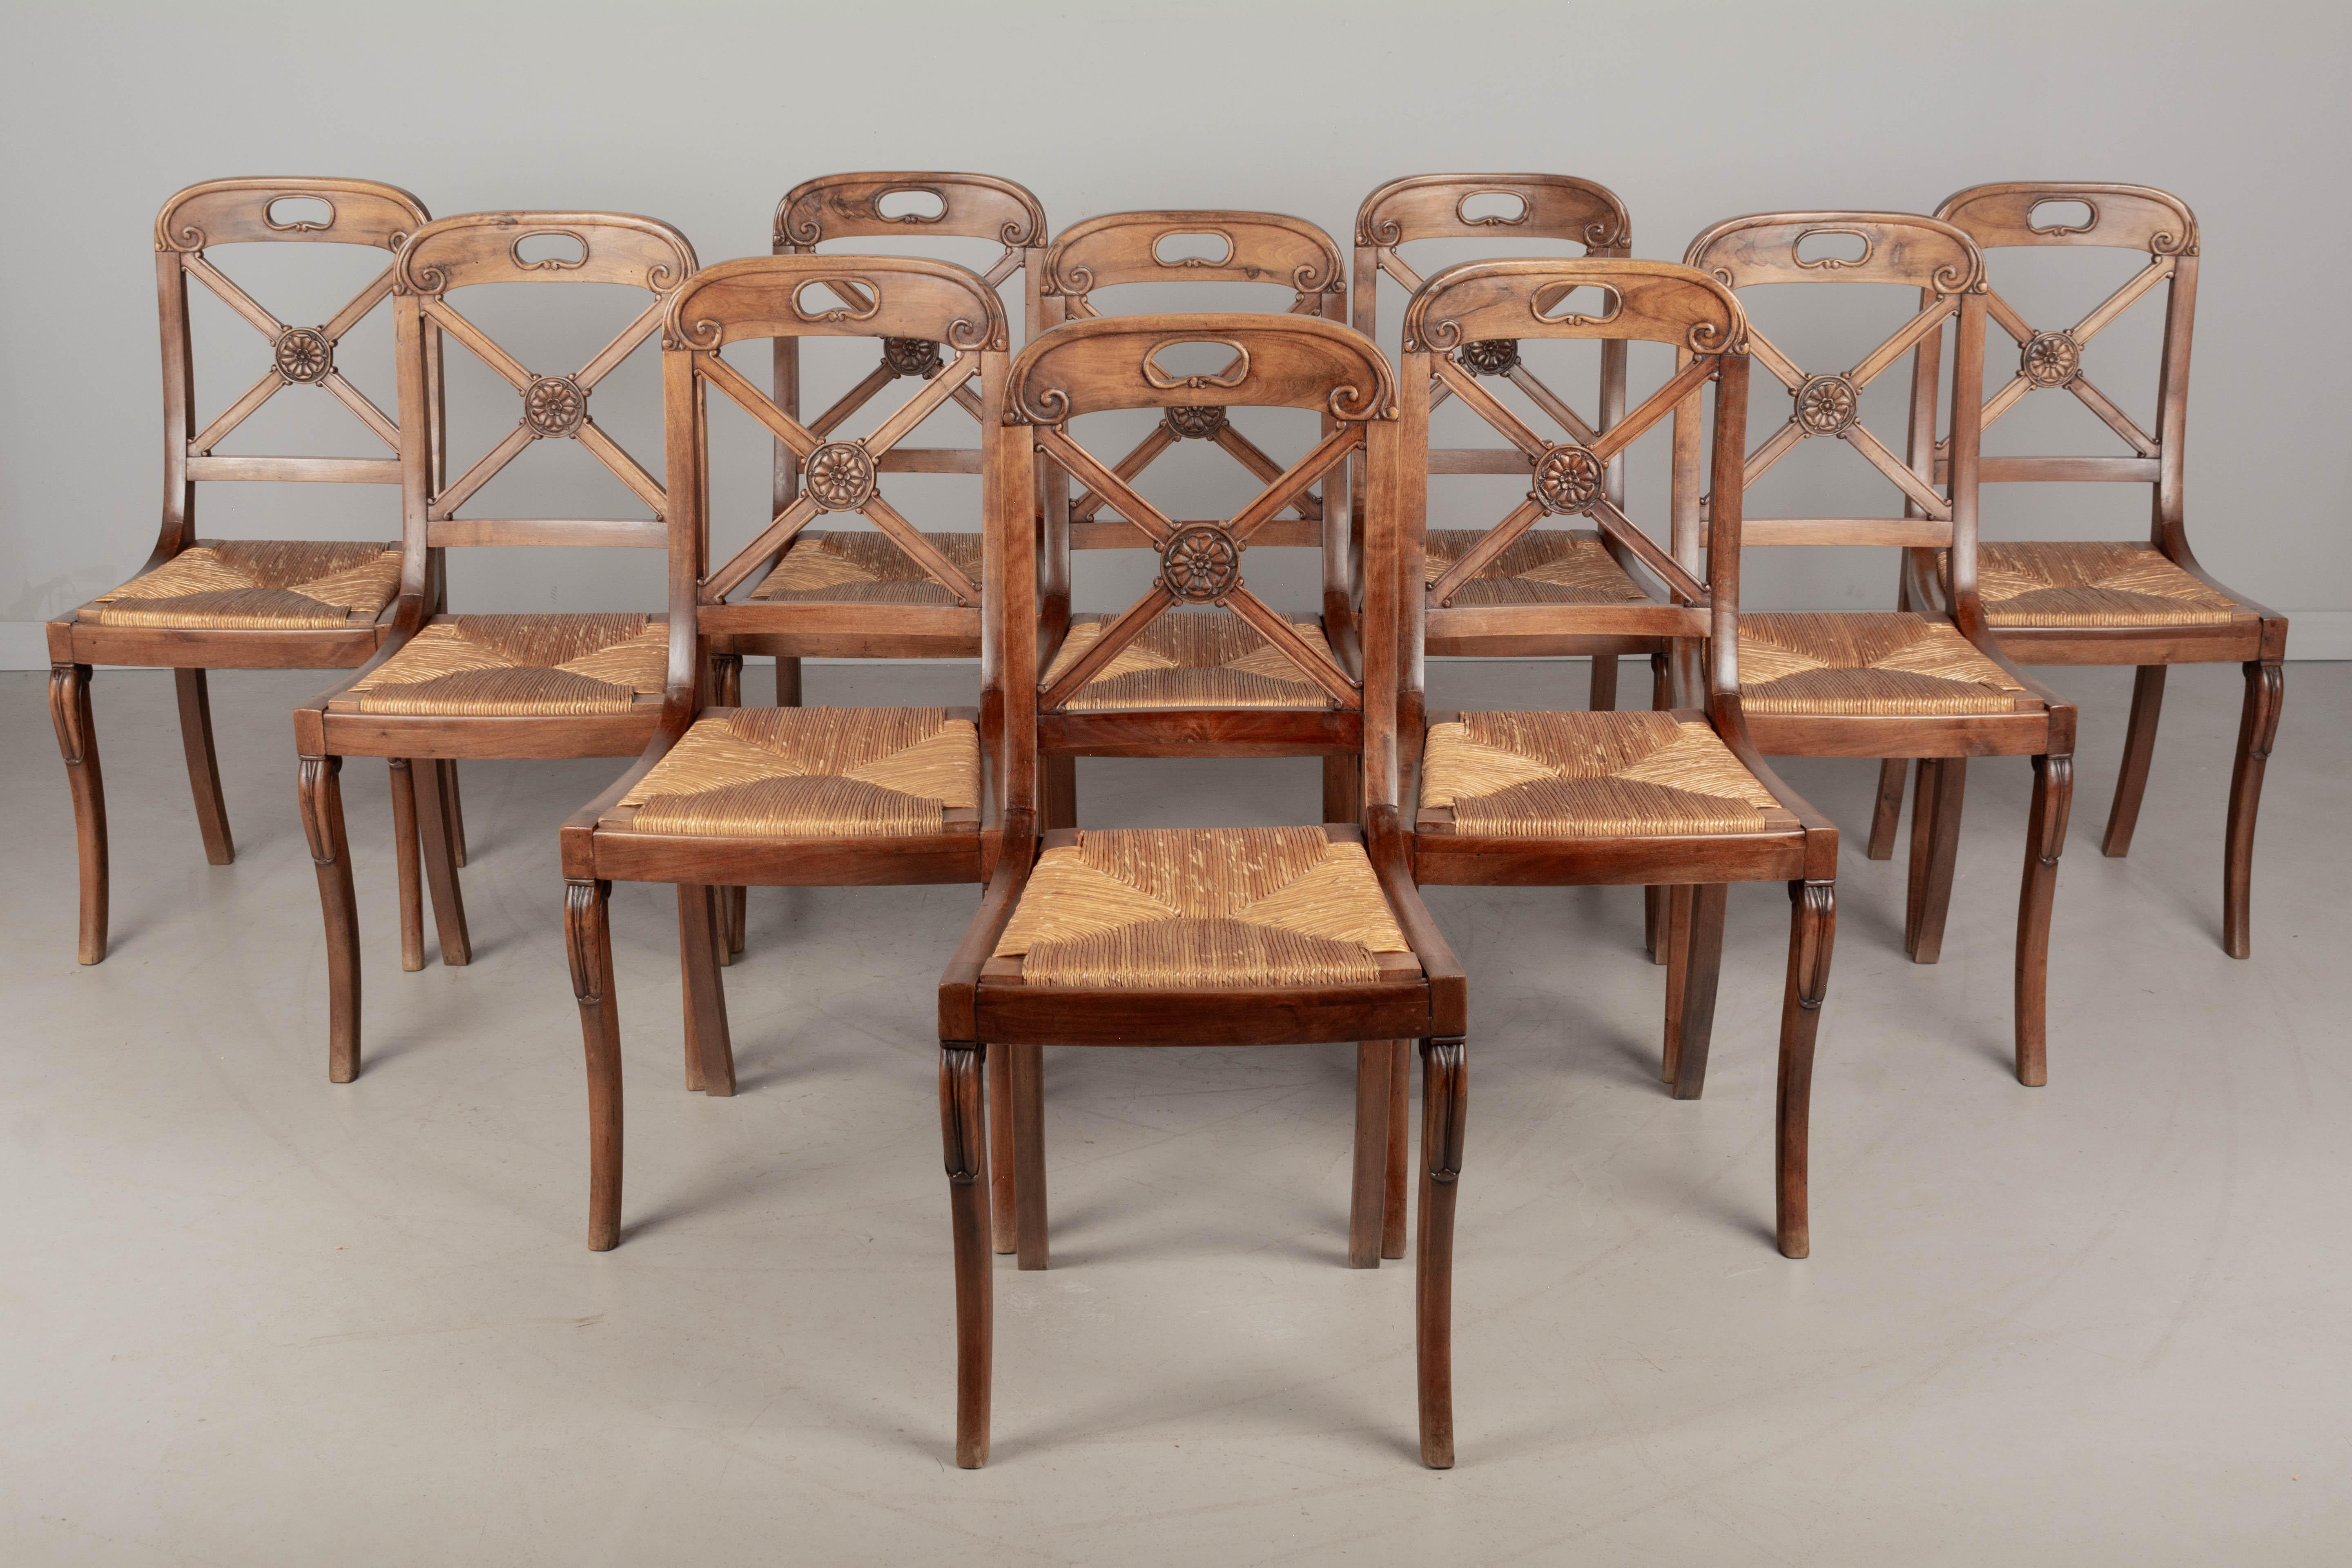 A set of ten French Restauration style dining chairs with walnut frame and natural rush seat. Carved rosette detail and handle at the top. Chairs are sturdy and the removable rush seats are in good condition. Circa 1950s
Overall dimensions: 17.25